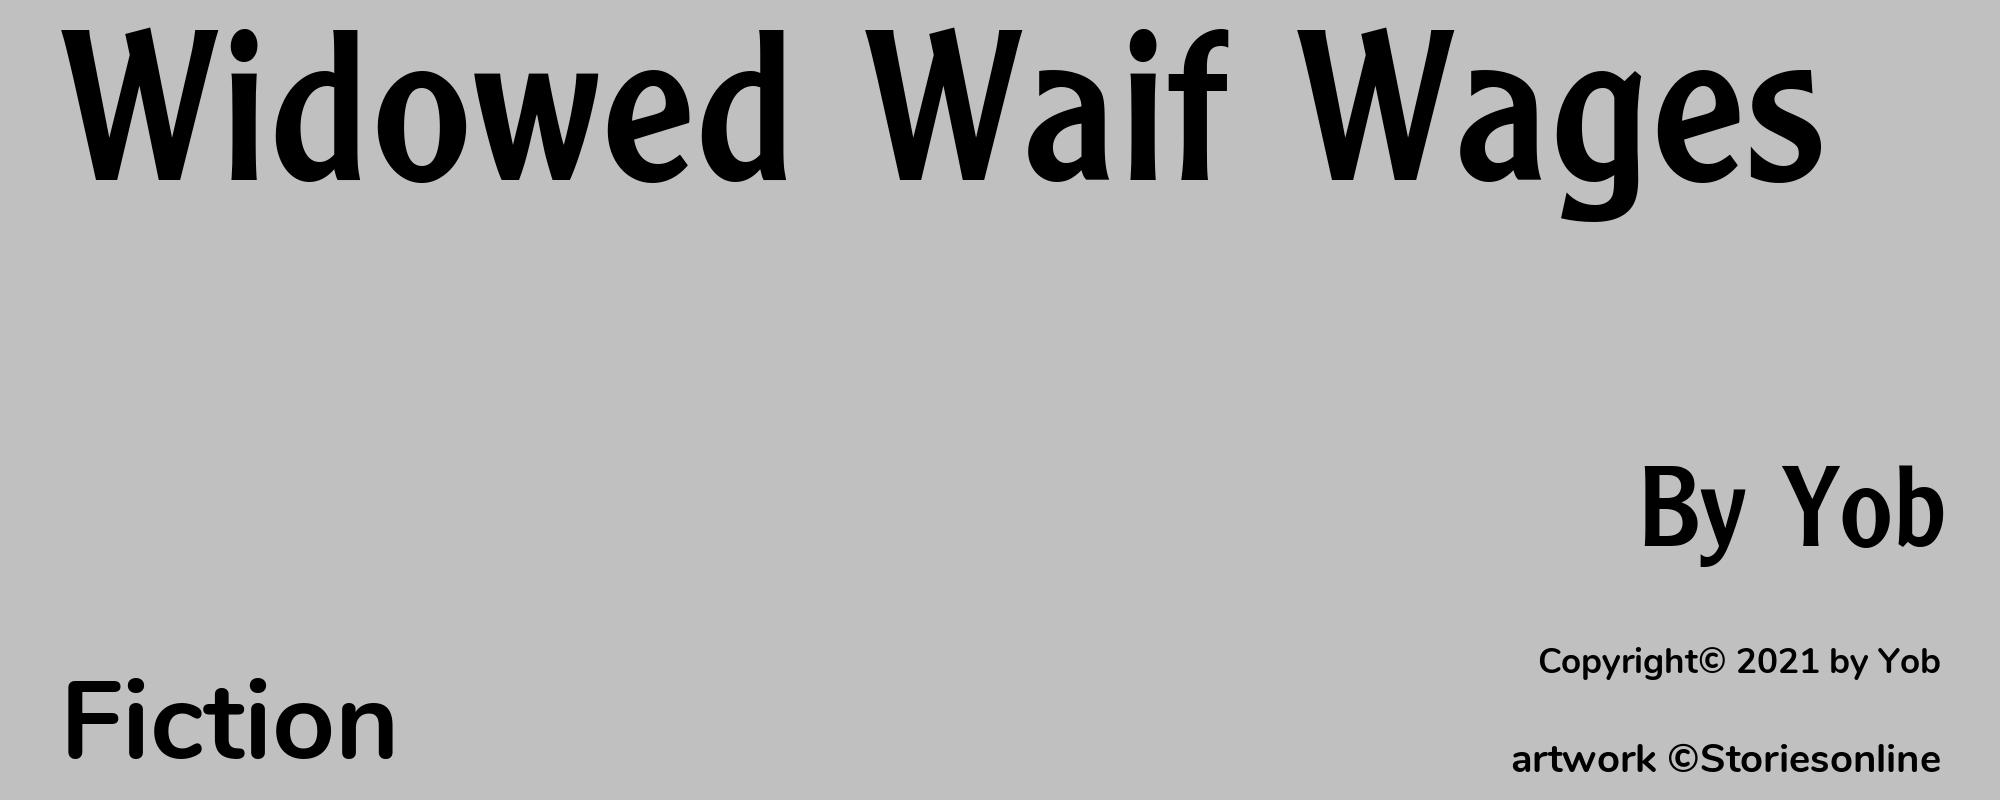 Widowed Waif Wages - Cover